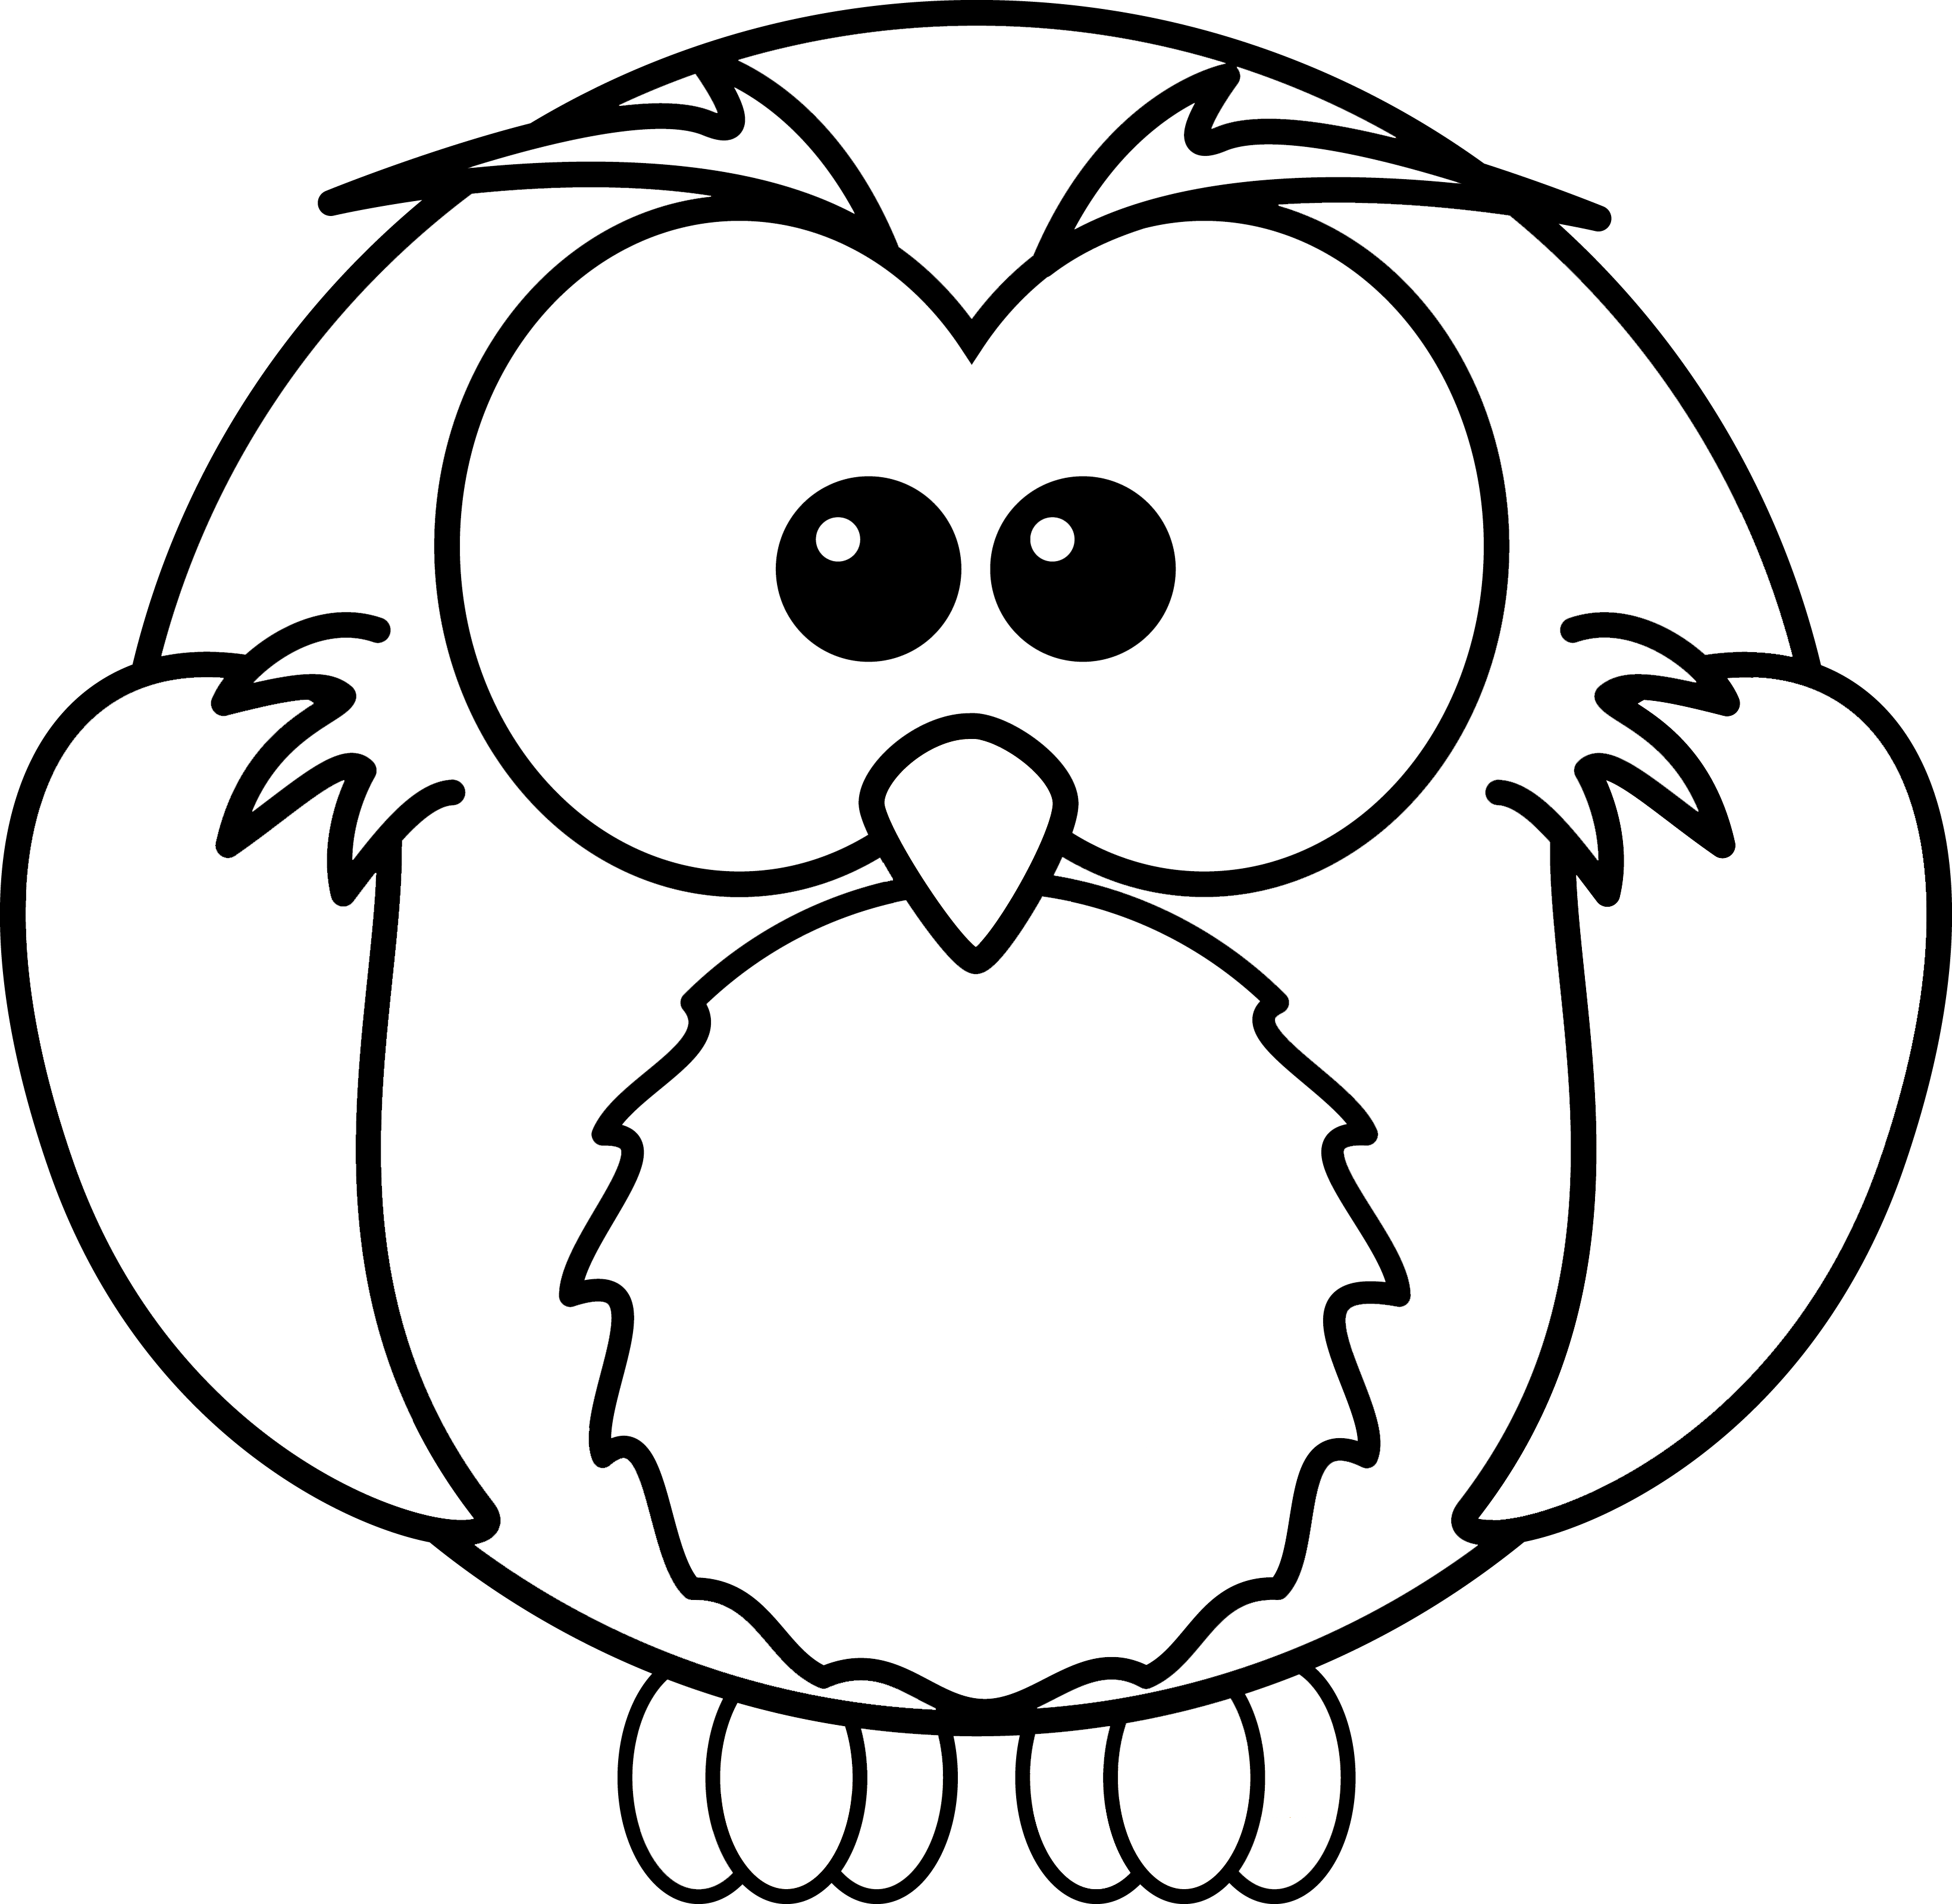 Clipart line drawing of owl